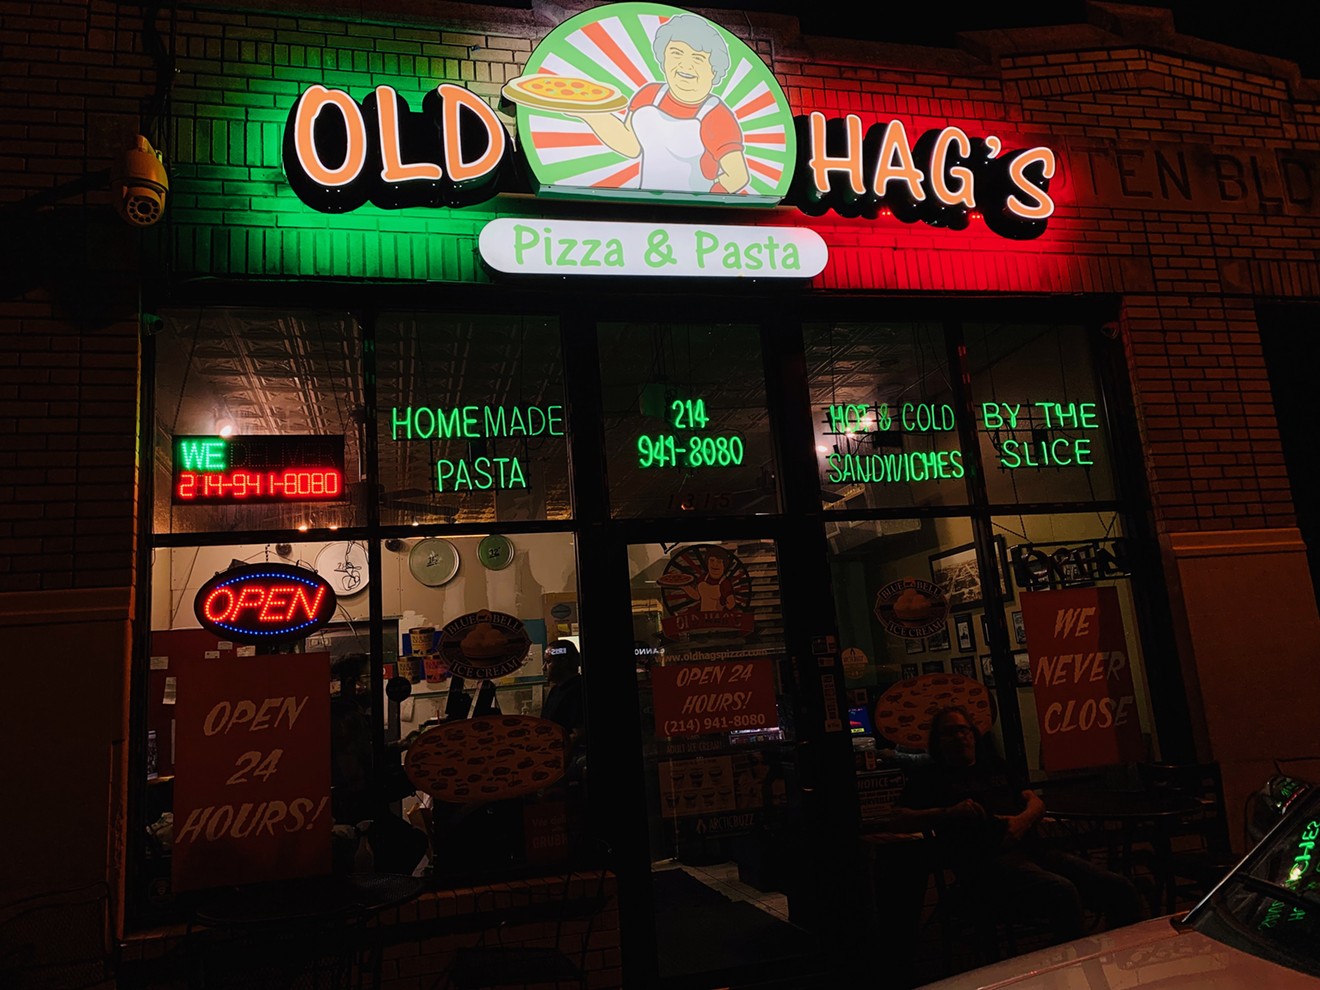 Old Hag's Pizza, formerly David's Oak Cliff Pizza, recently adopted 24/7 hours.